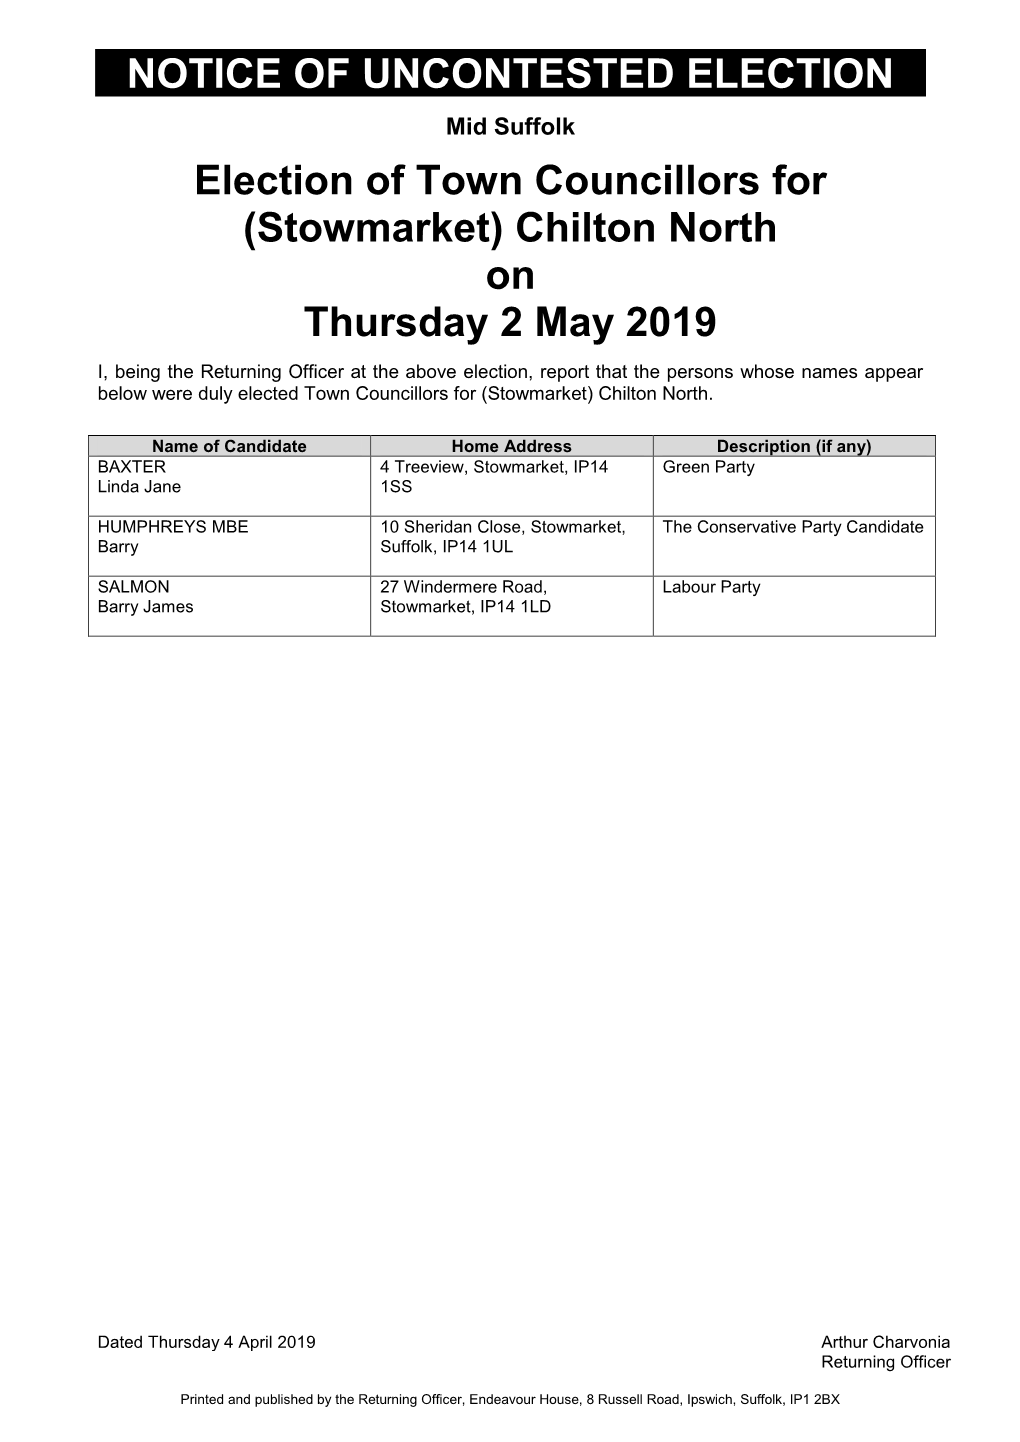 Election of Town Councillors for (Stowmarket) Chilton North on Thursday 2 May 2019